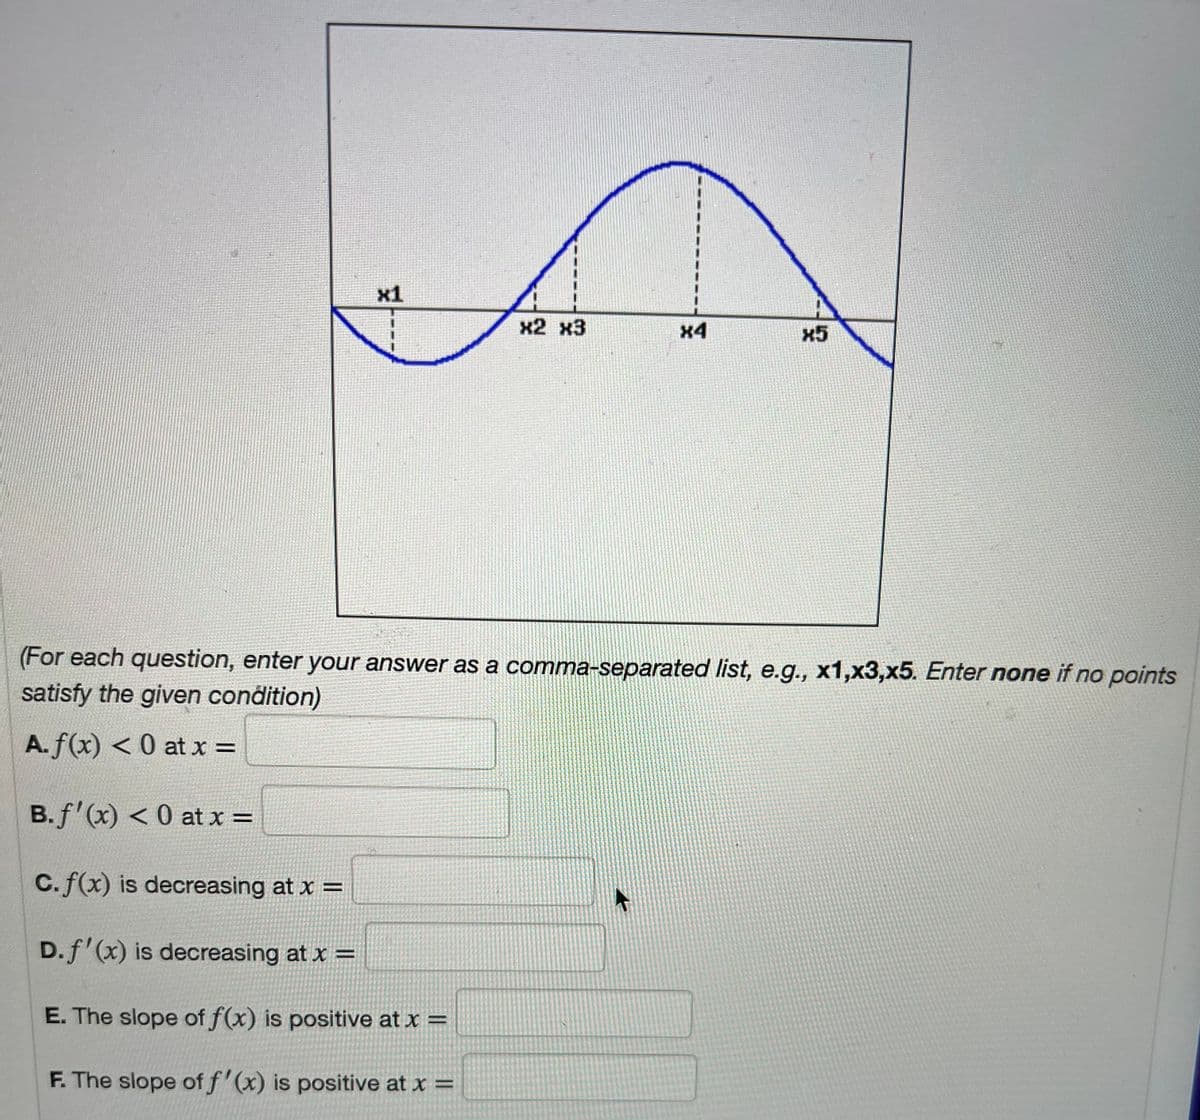 x1
X2 X3
C.f(x) is decreasing at x =
D. f'(x) is decreasing at x =
E. The slope of f(x) is positive at x =
F. The slope of f'(x) is positive at x =
x4
X5
(For each question, enter your answer as a comma-separated list, e.g., x1,x3,x5. Enter none if no points
satisfy the given condition)
A. f(x) < 0 at x =
B. f'(x) < 0 at x =